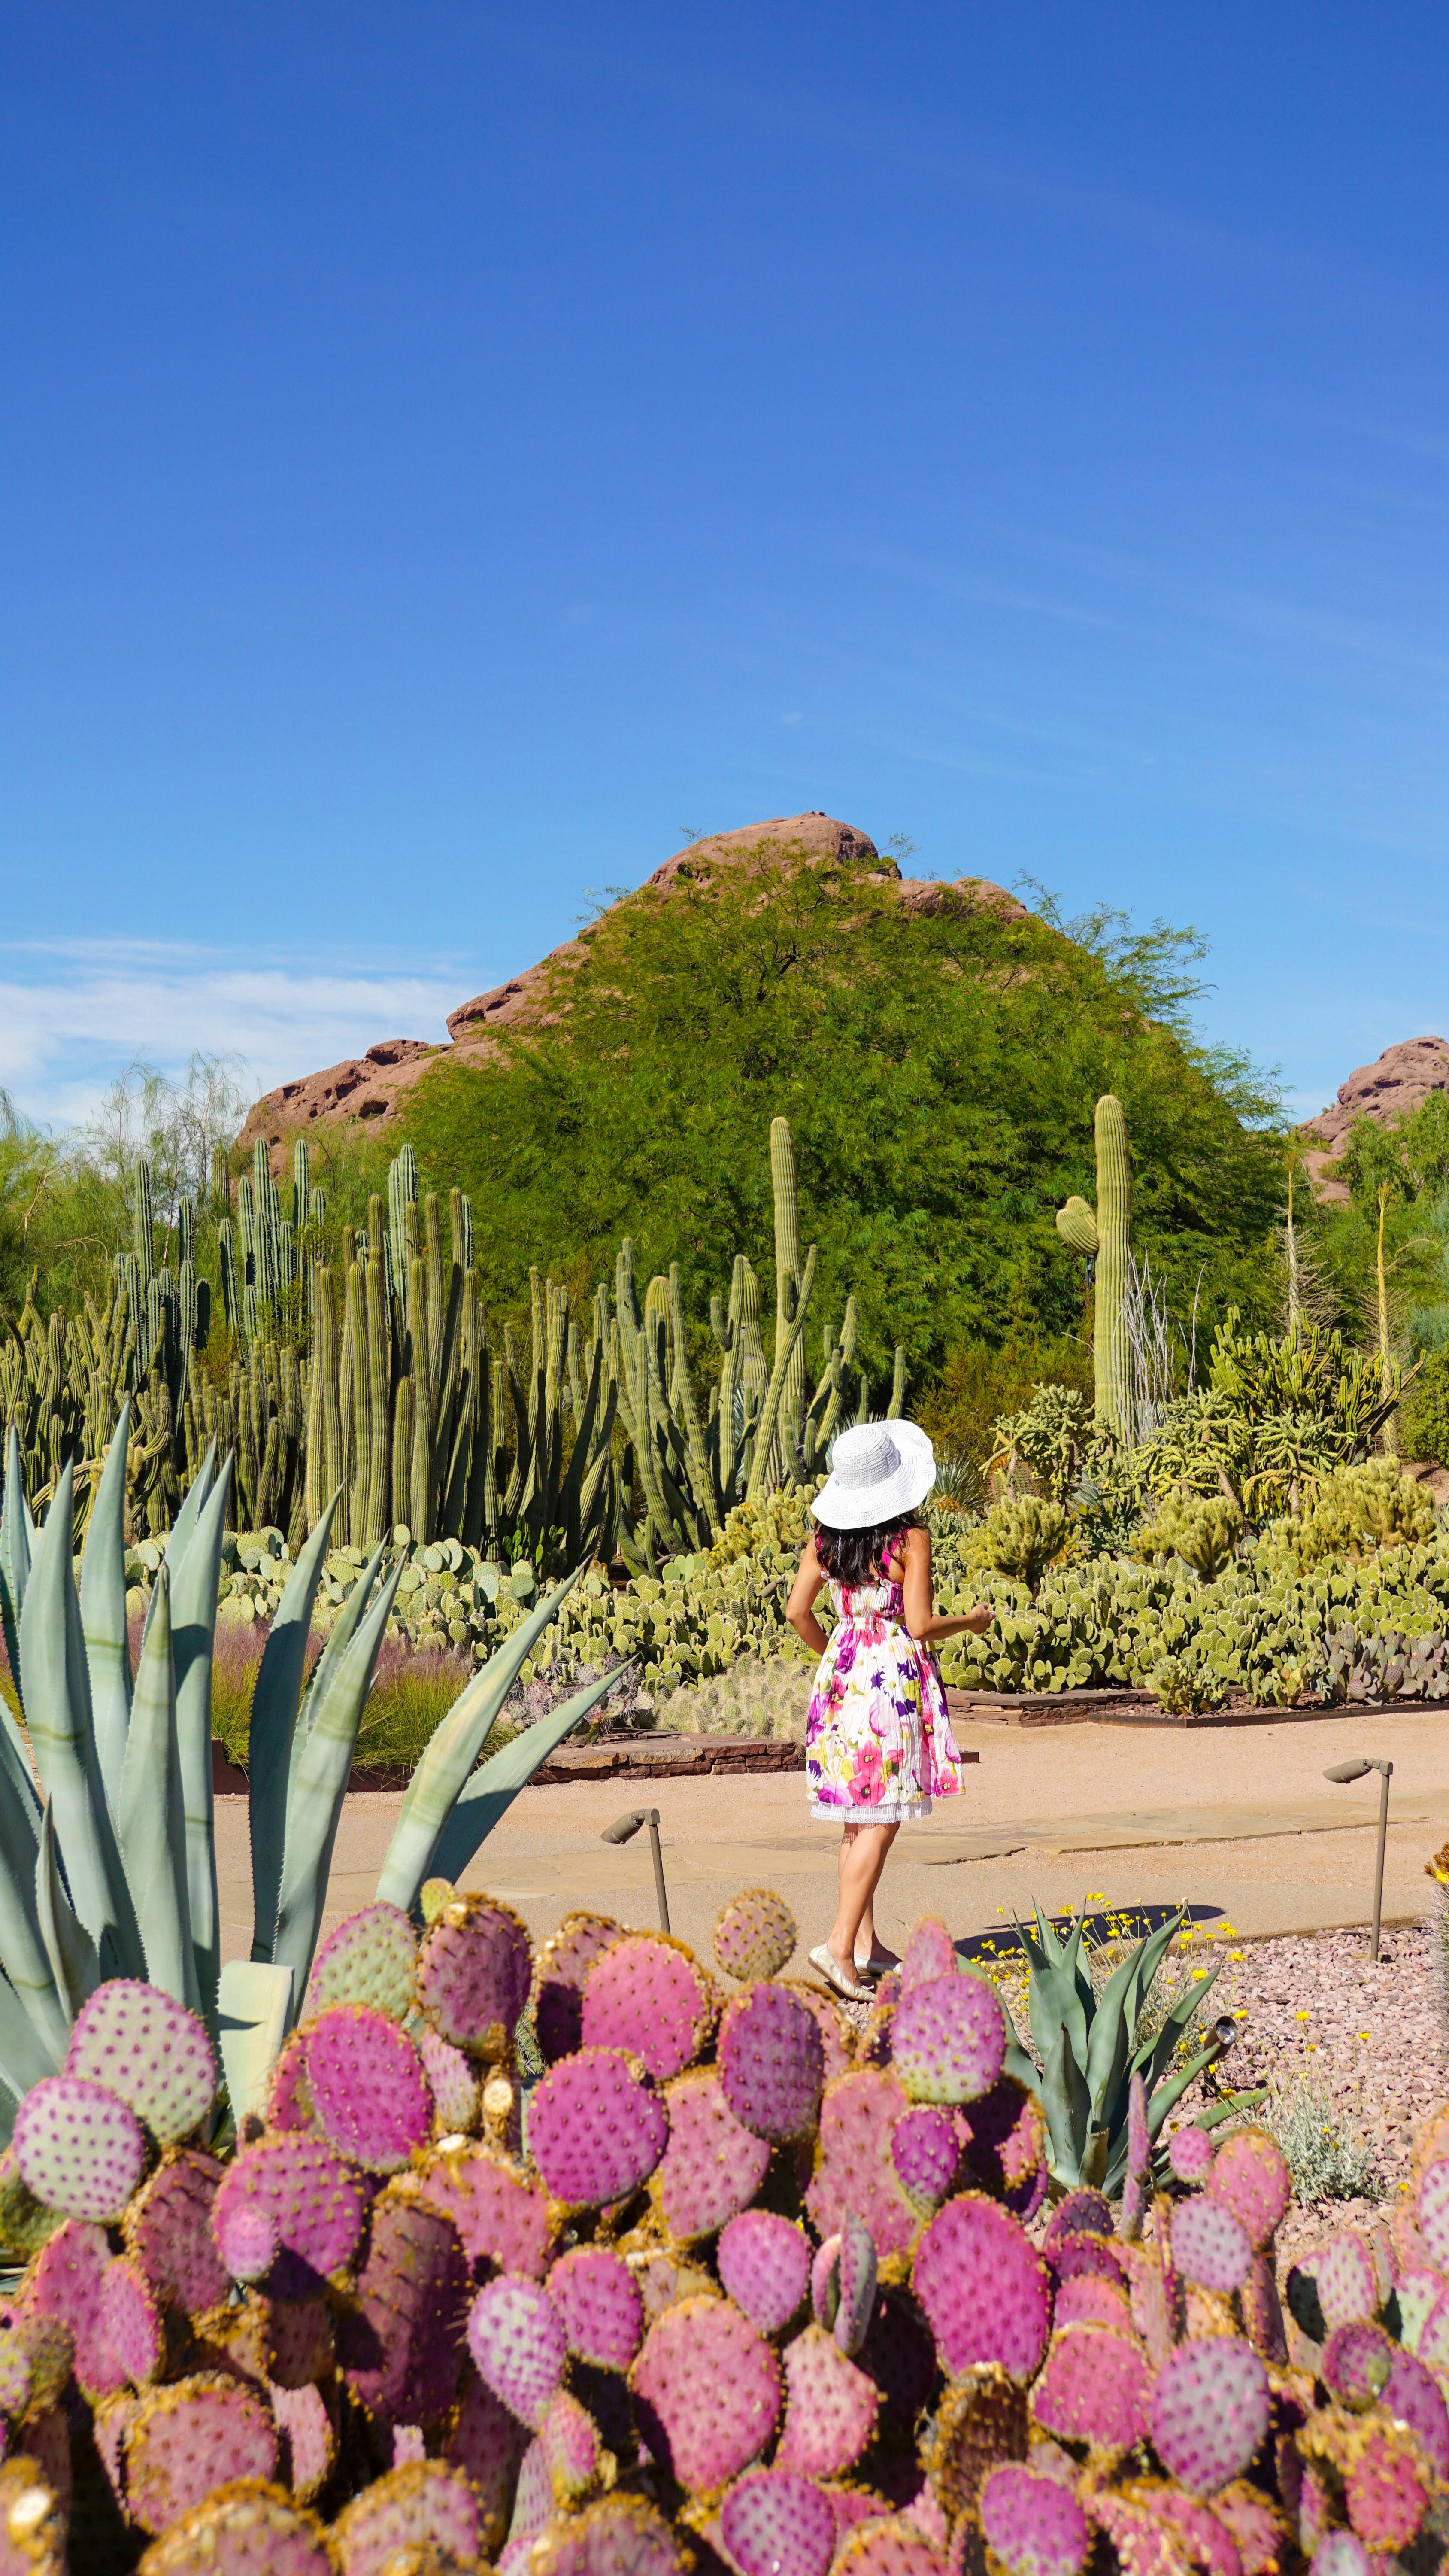 You wonâ€™t want to miss the Desert Botanical Garden @dbgphx if you are into horticulture